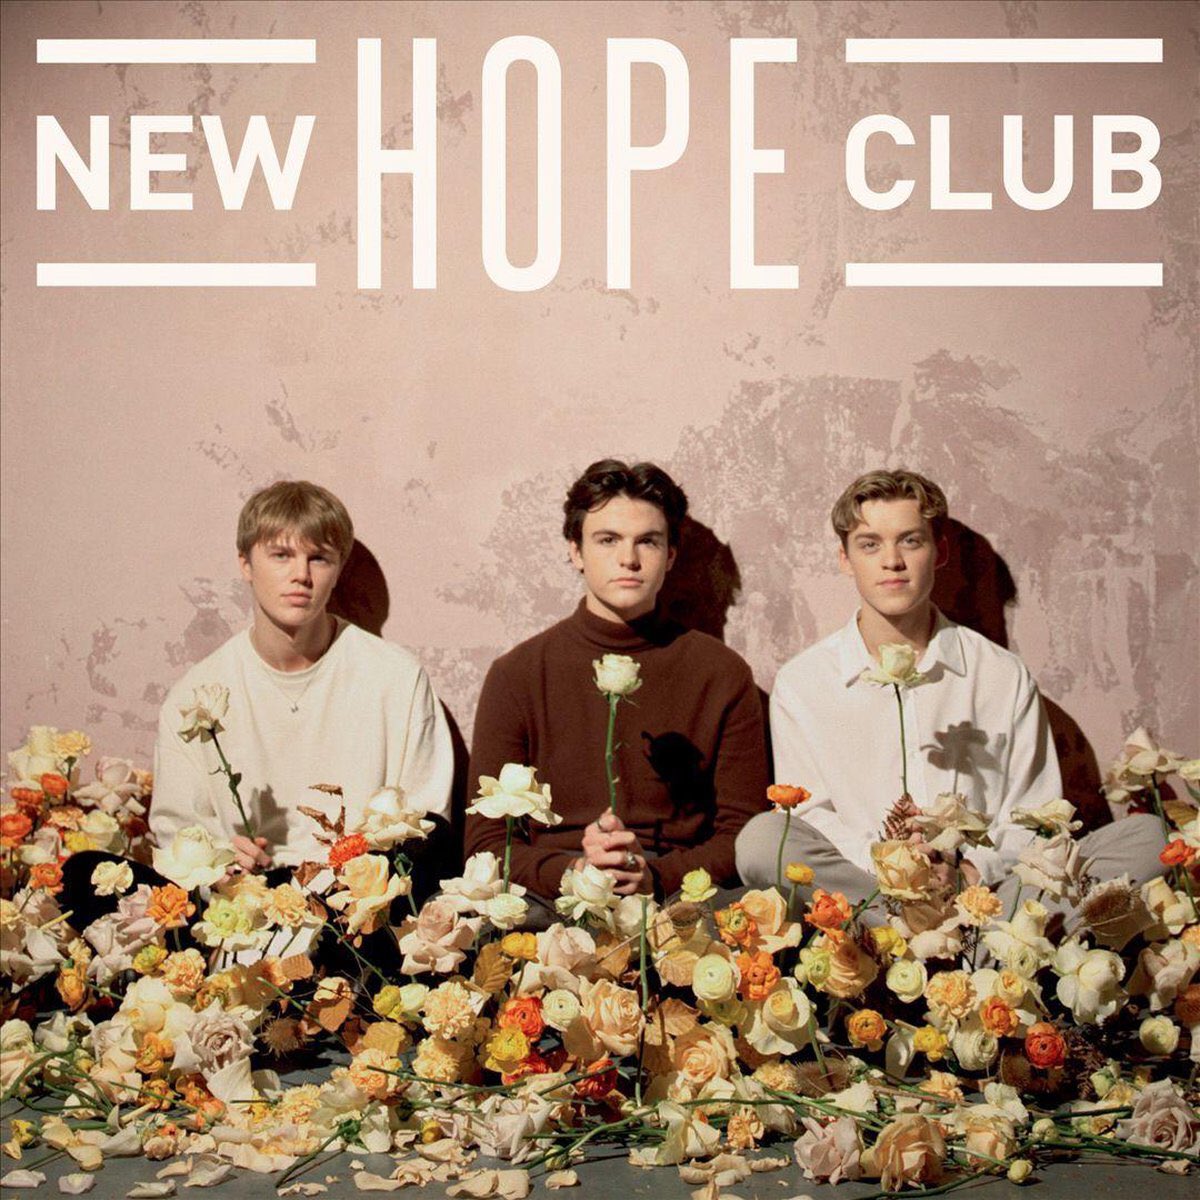 top 3 from new hope club by new hope club